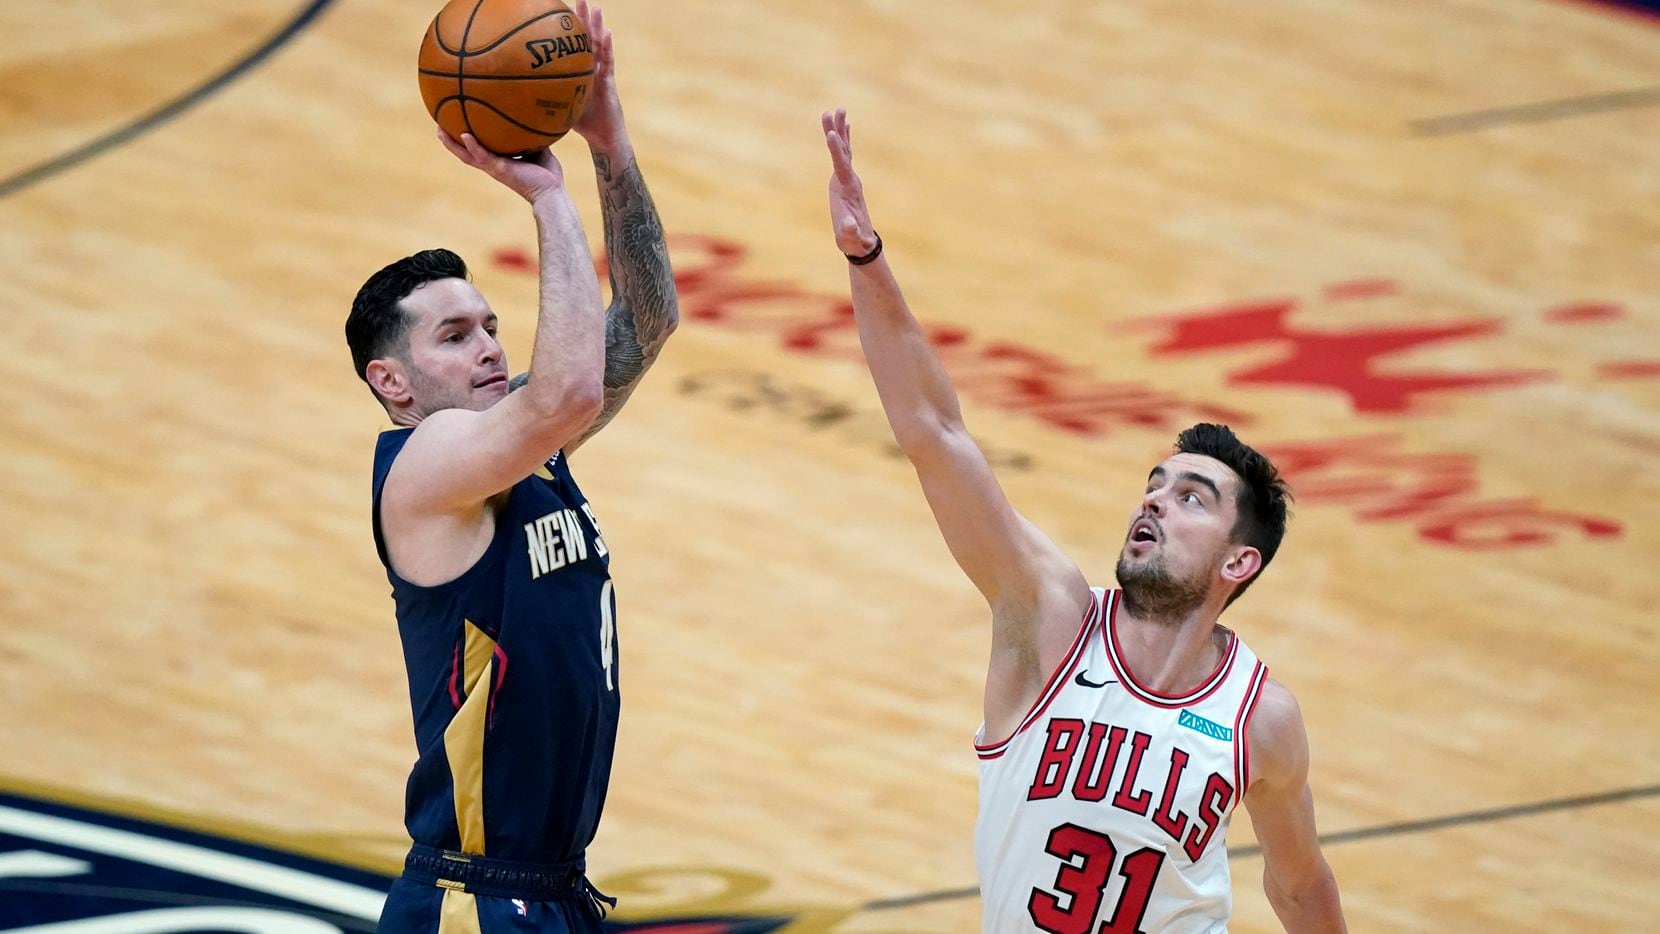 Pelicans guard JJ Redick shoots over Bulls guard Tomas Satoransky (31) during the first half of a game in New Orleans on Wednesday, March 3, 2021. (AP Photo/Gerald Herbert)